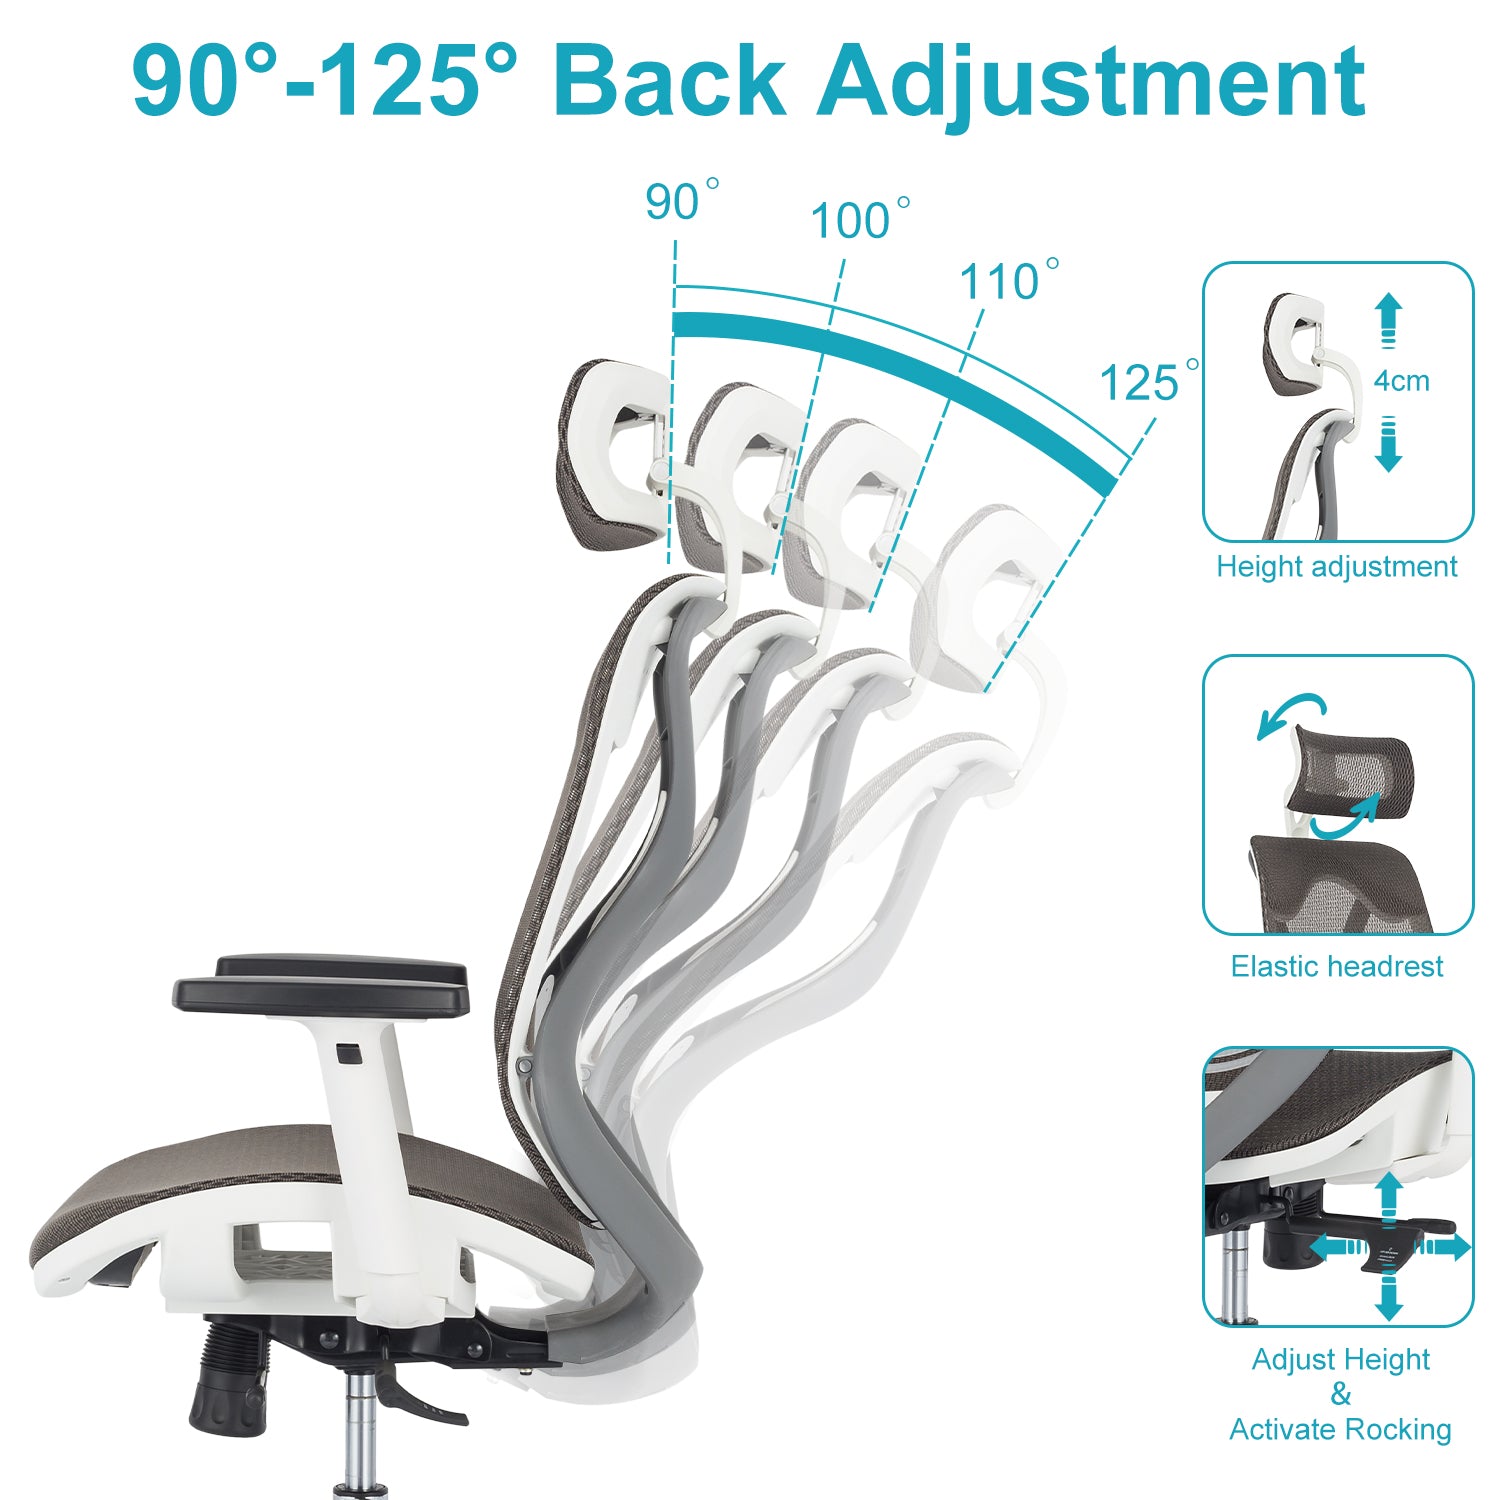 Ergonomic Chair Office, Gray Office Chair with Back Support, Desk Chair for Home Office Computer Chair